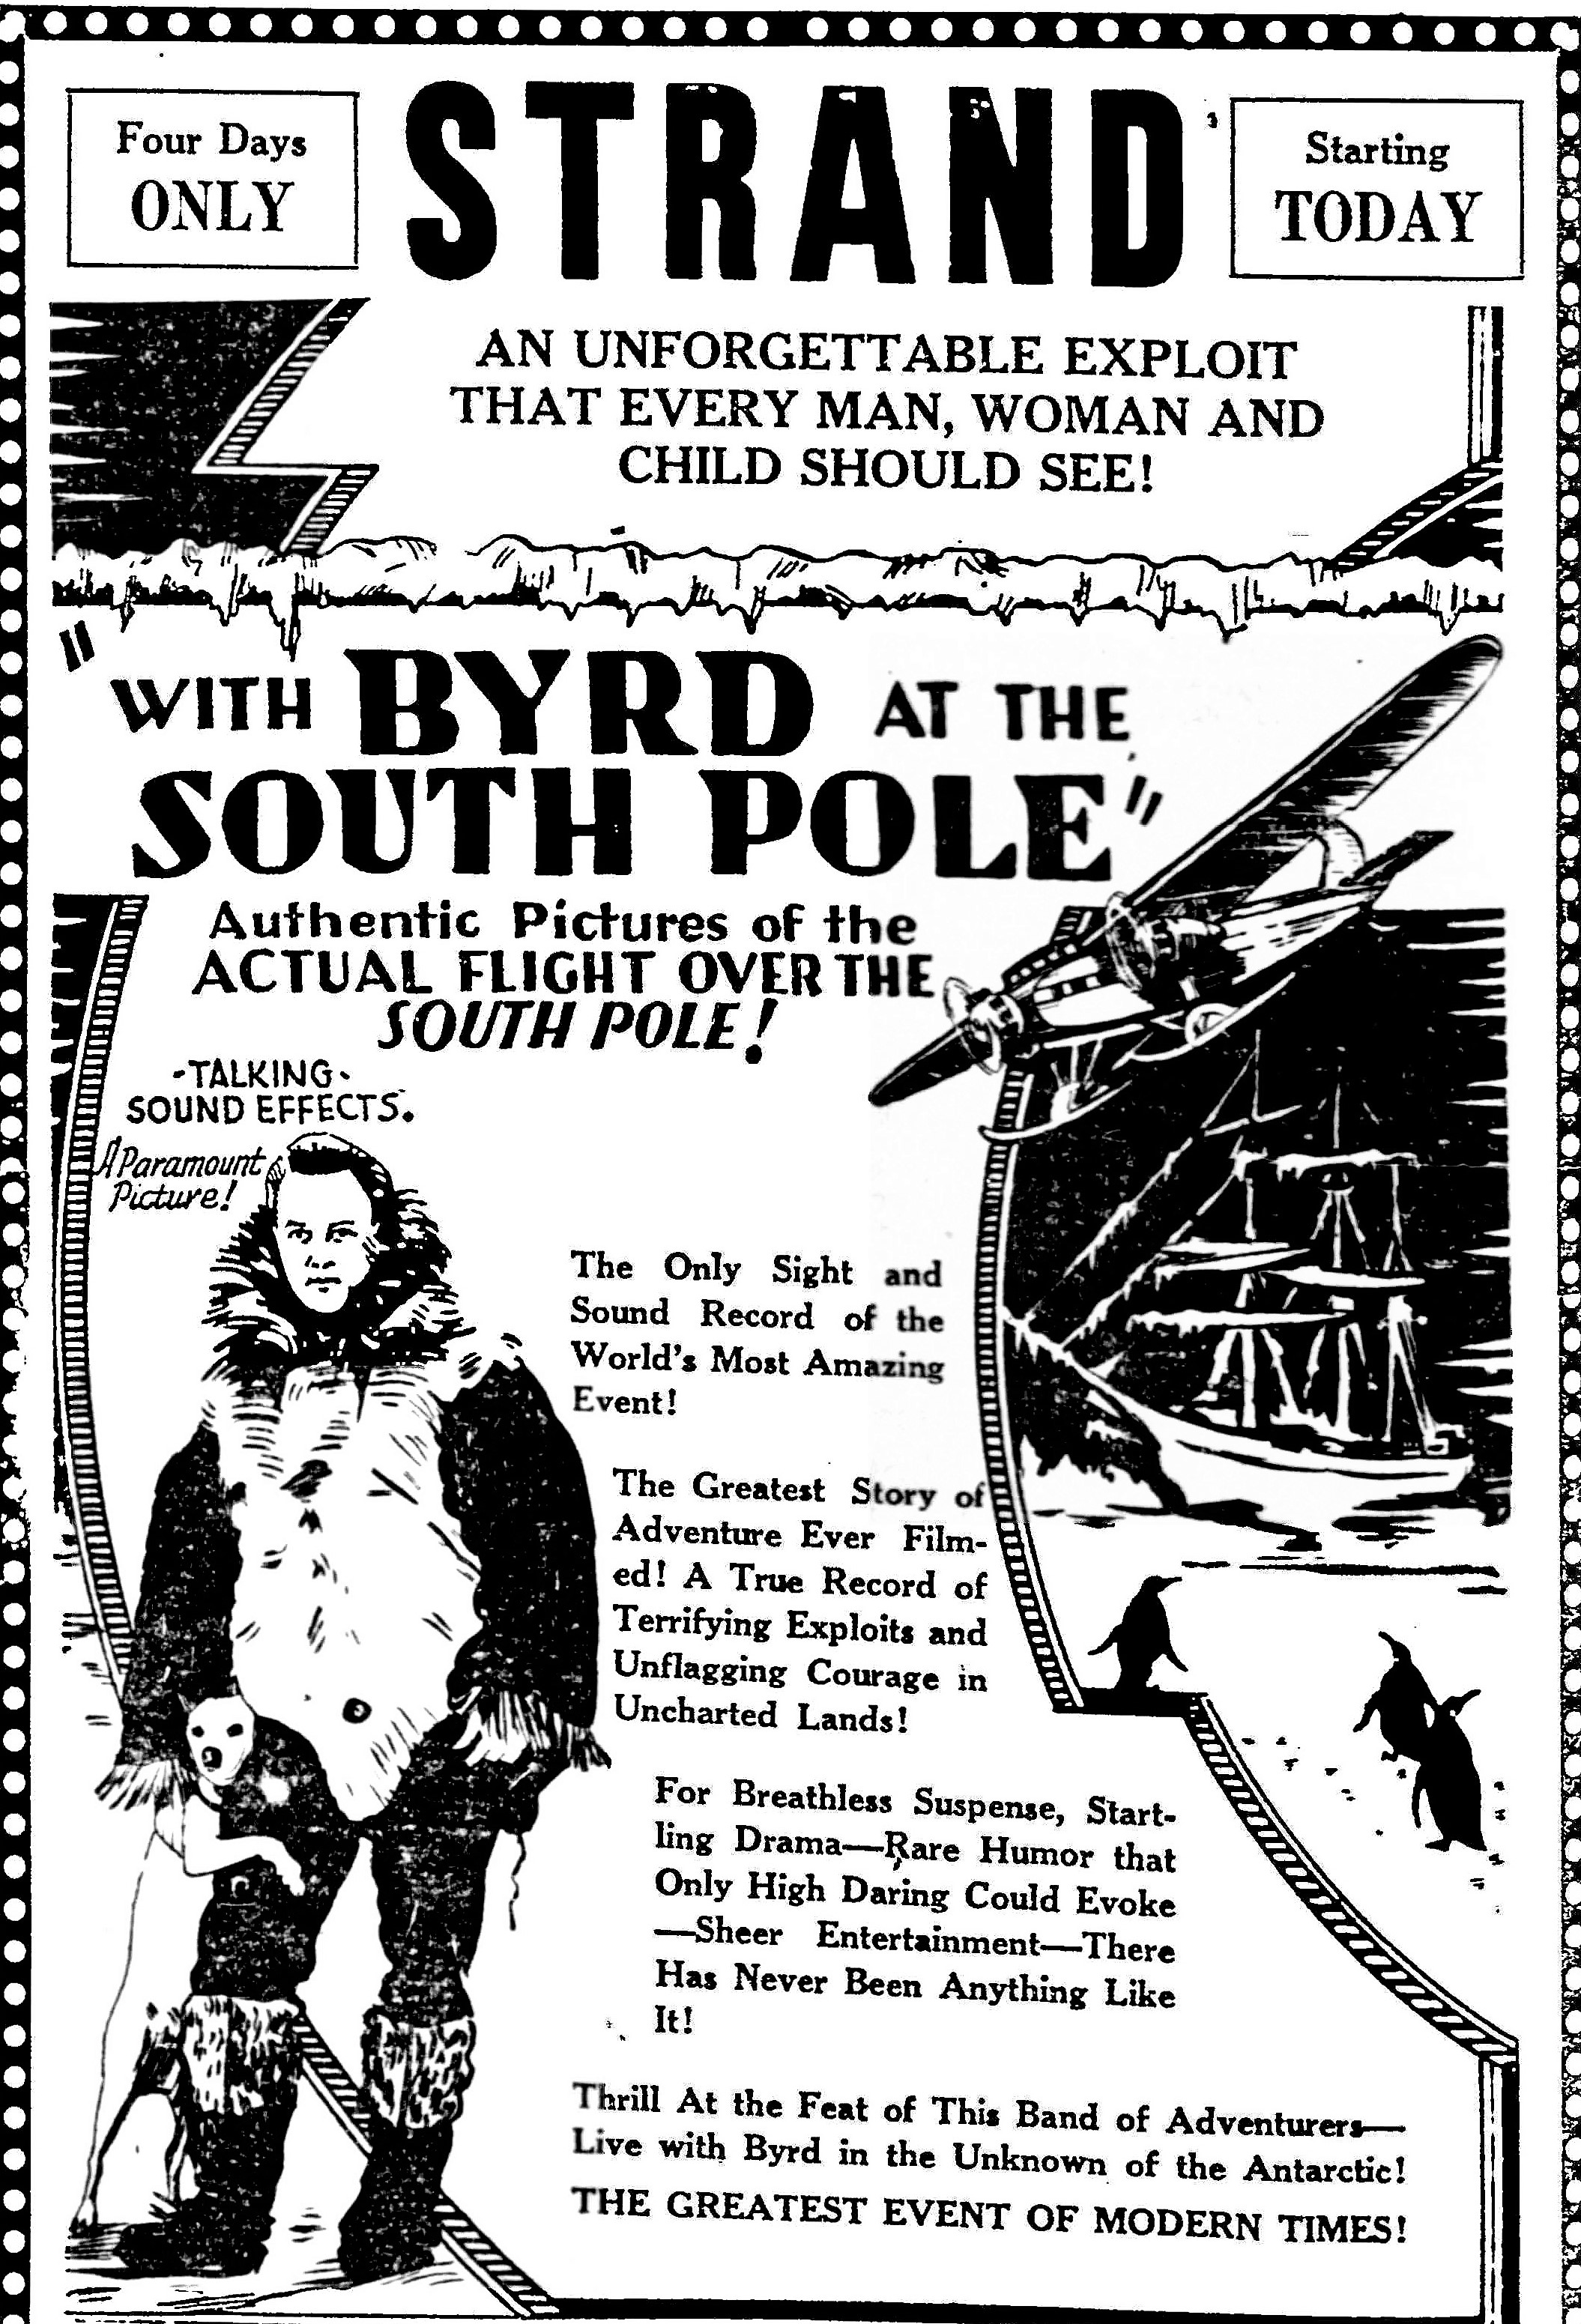 With Byrd at the South Pole (1930) Screenshot 3